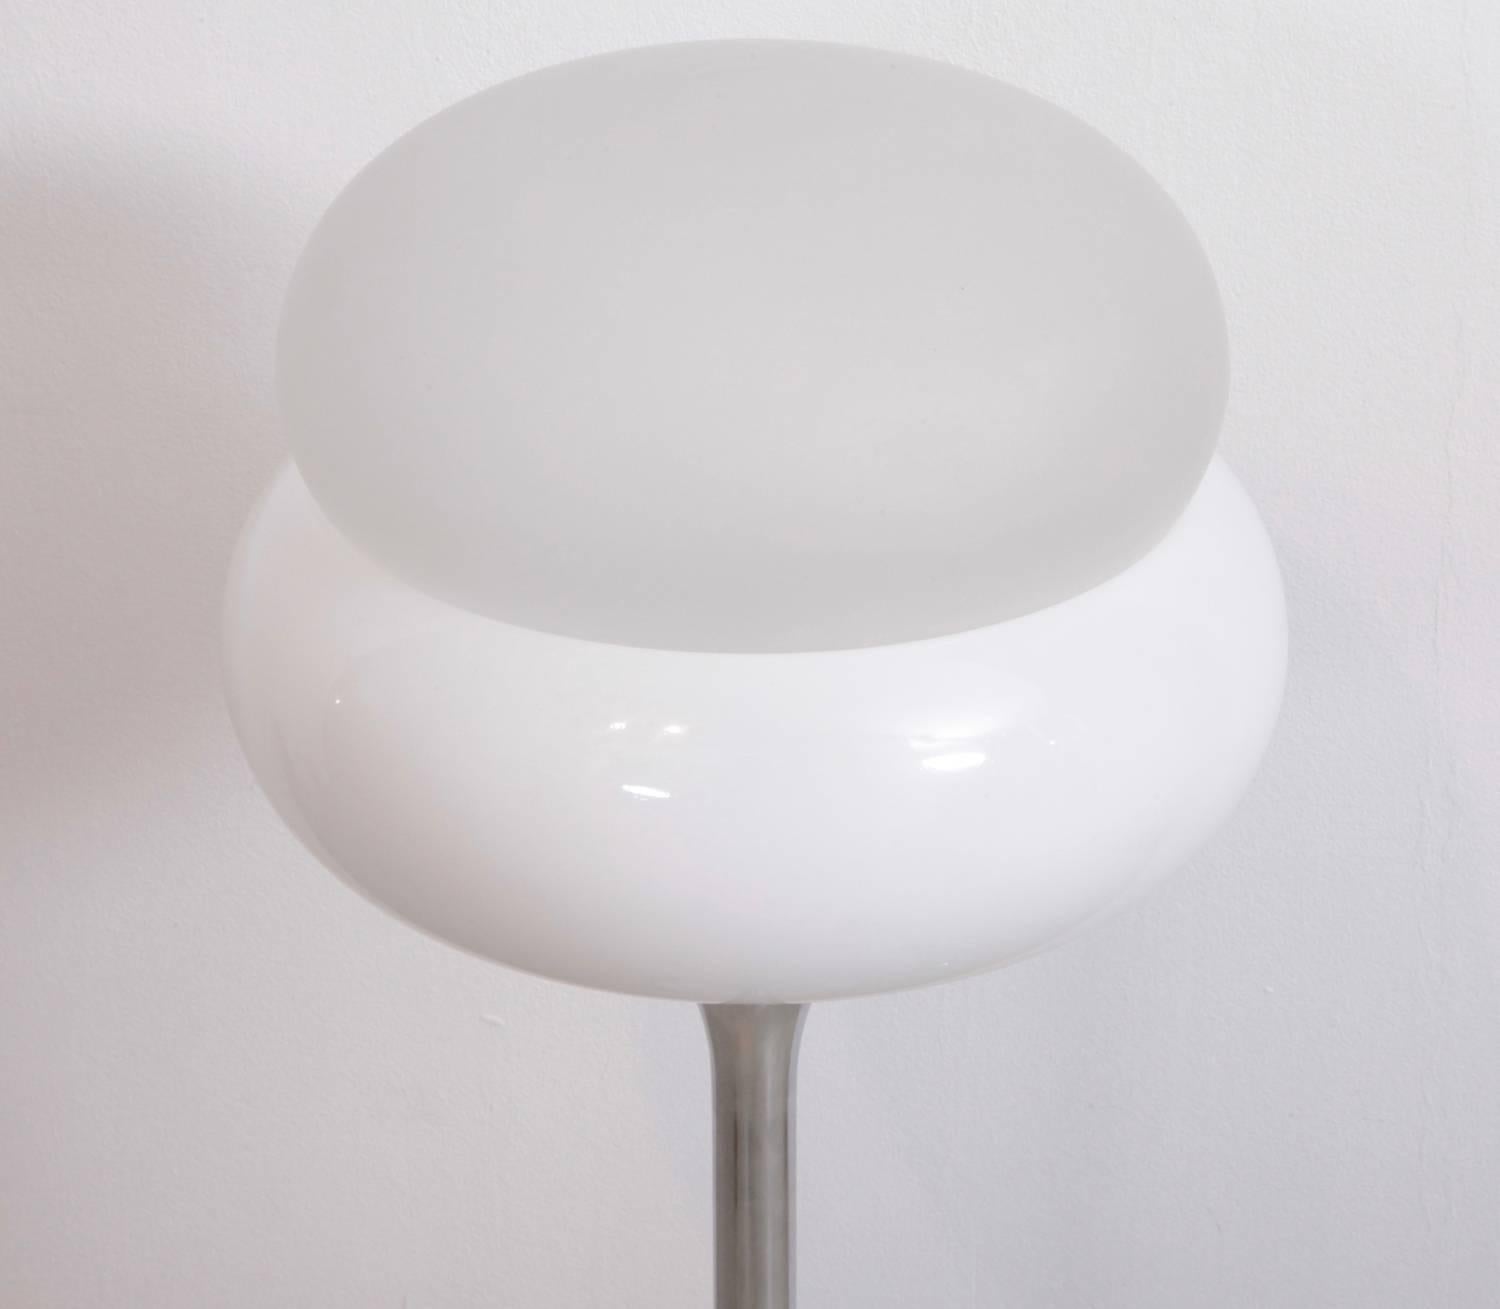 Nice 1970s Italian Floor Lamp with satinized glass/ Lucite bubble shade and chrome base.
A rare to find medium height!

